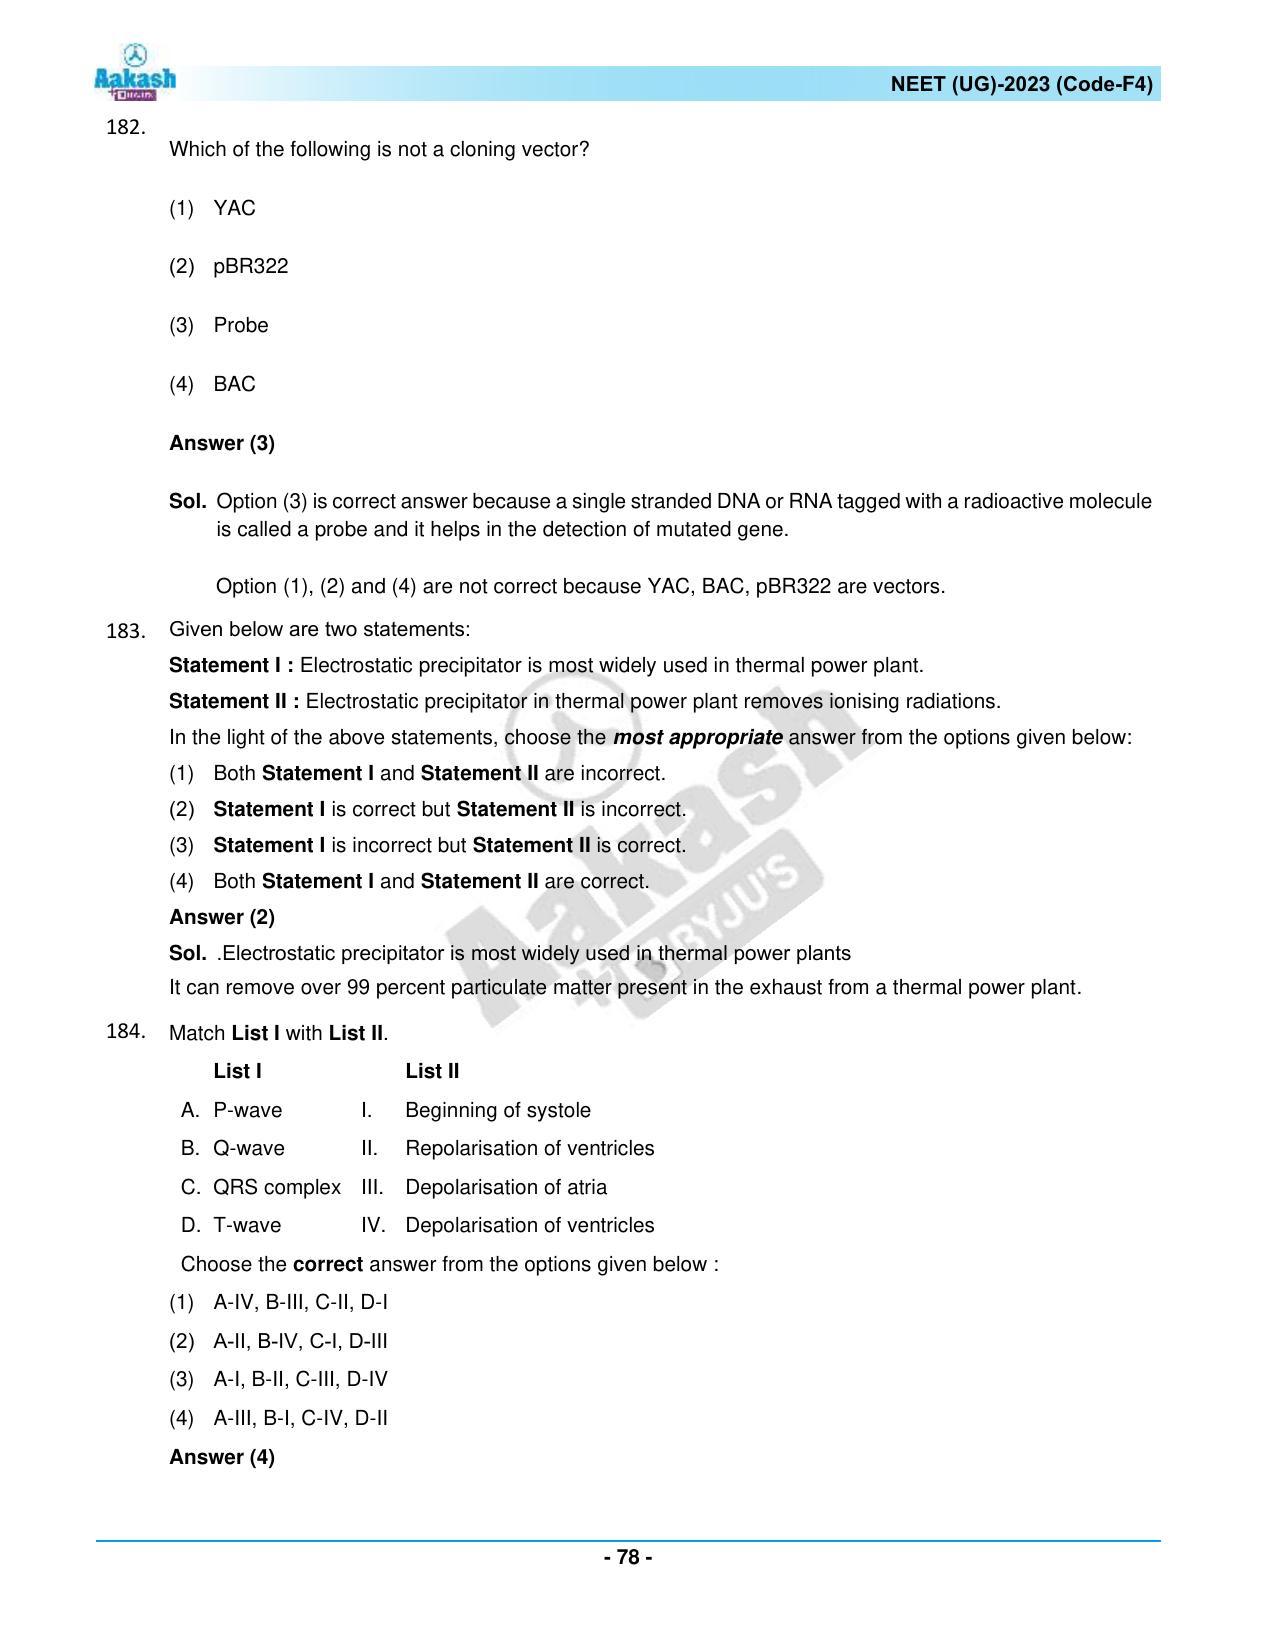 NEET 2023 Question Paper F4 - Page 78